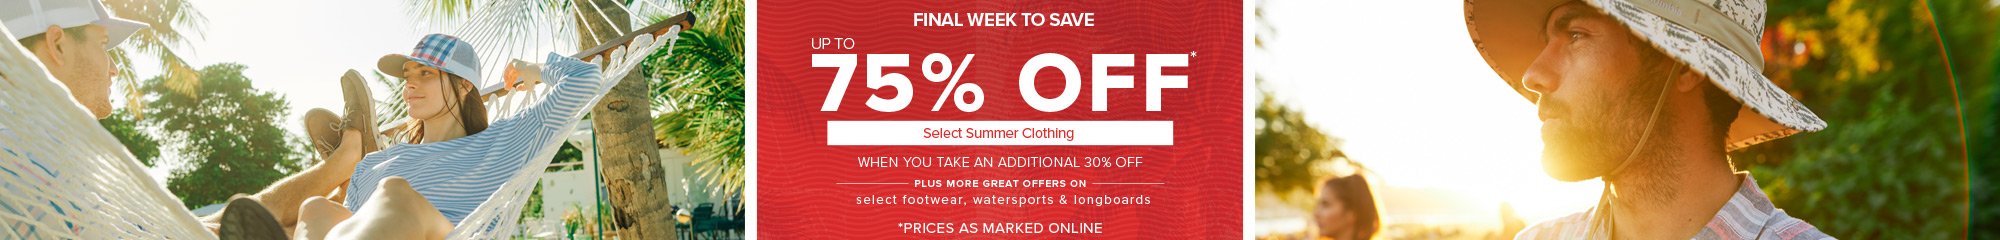 Last Days of Summer Clearance Blowout - Additional 30% Off Select Summer Apparel. Plus 30% Off Select Footwear and 20% off Watersports and Longboards 